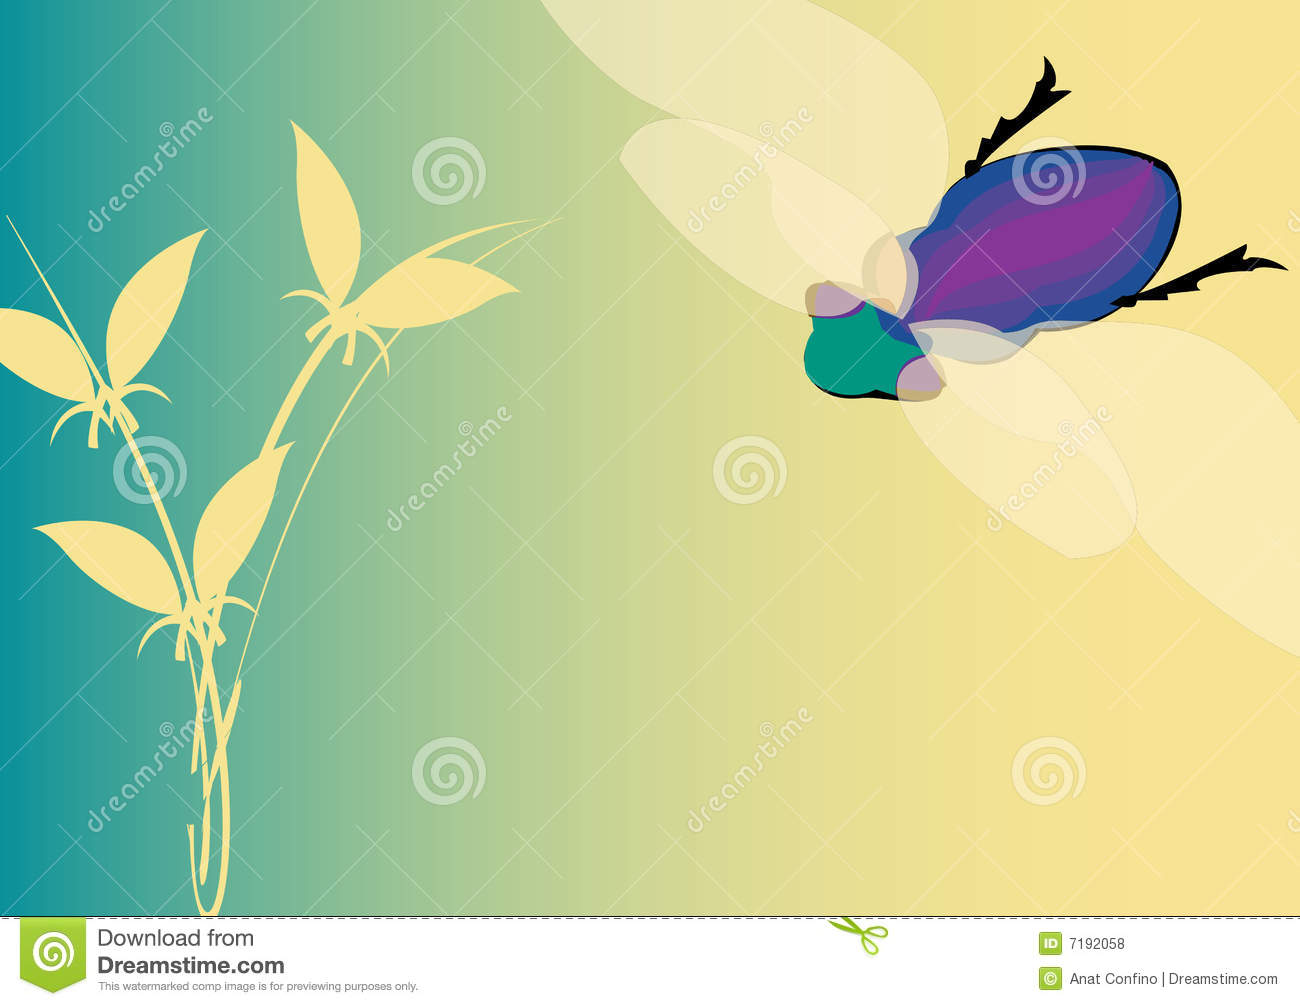 Changing Seasons Illustration With Colorful Fly And Plant On Turquoise